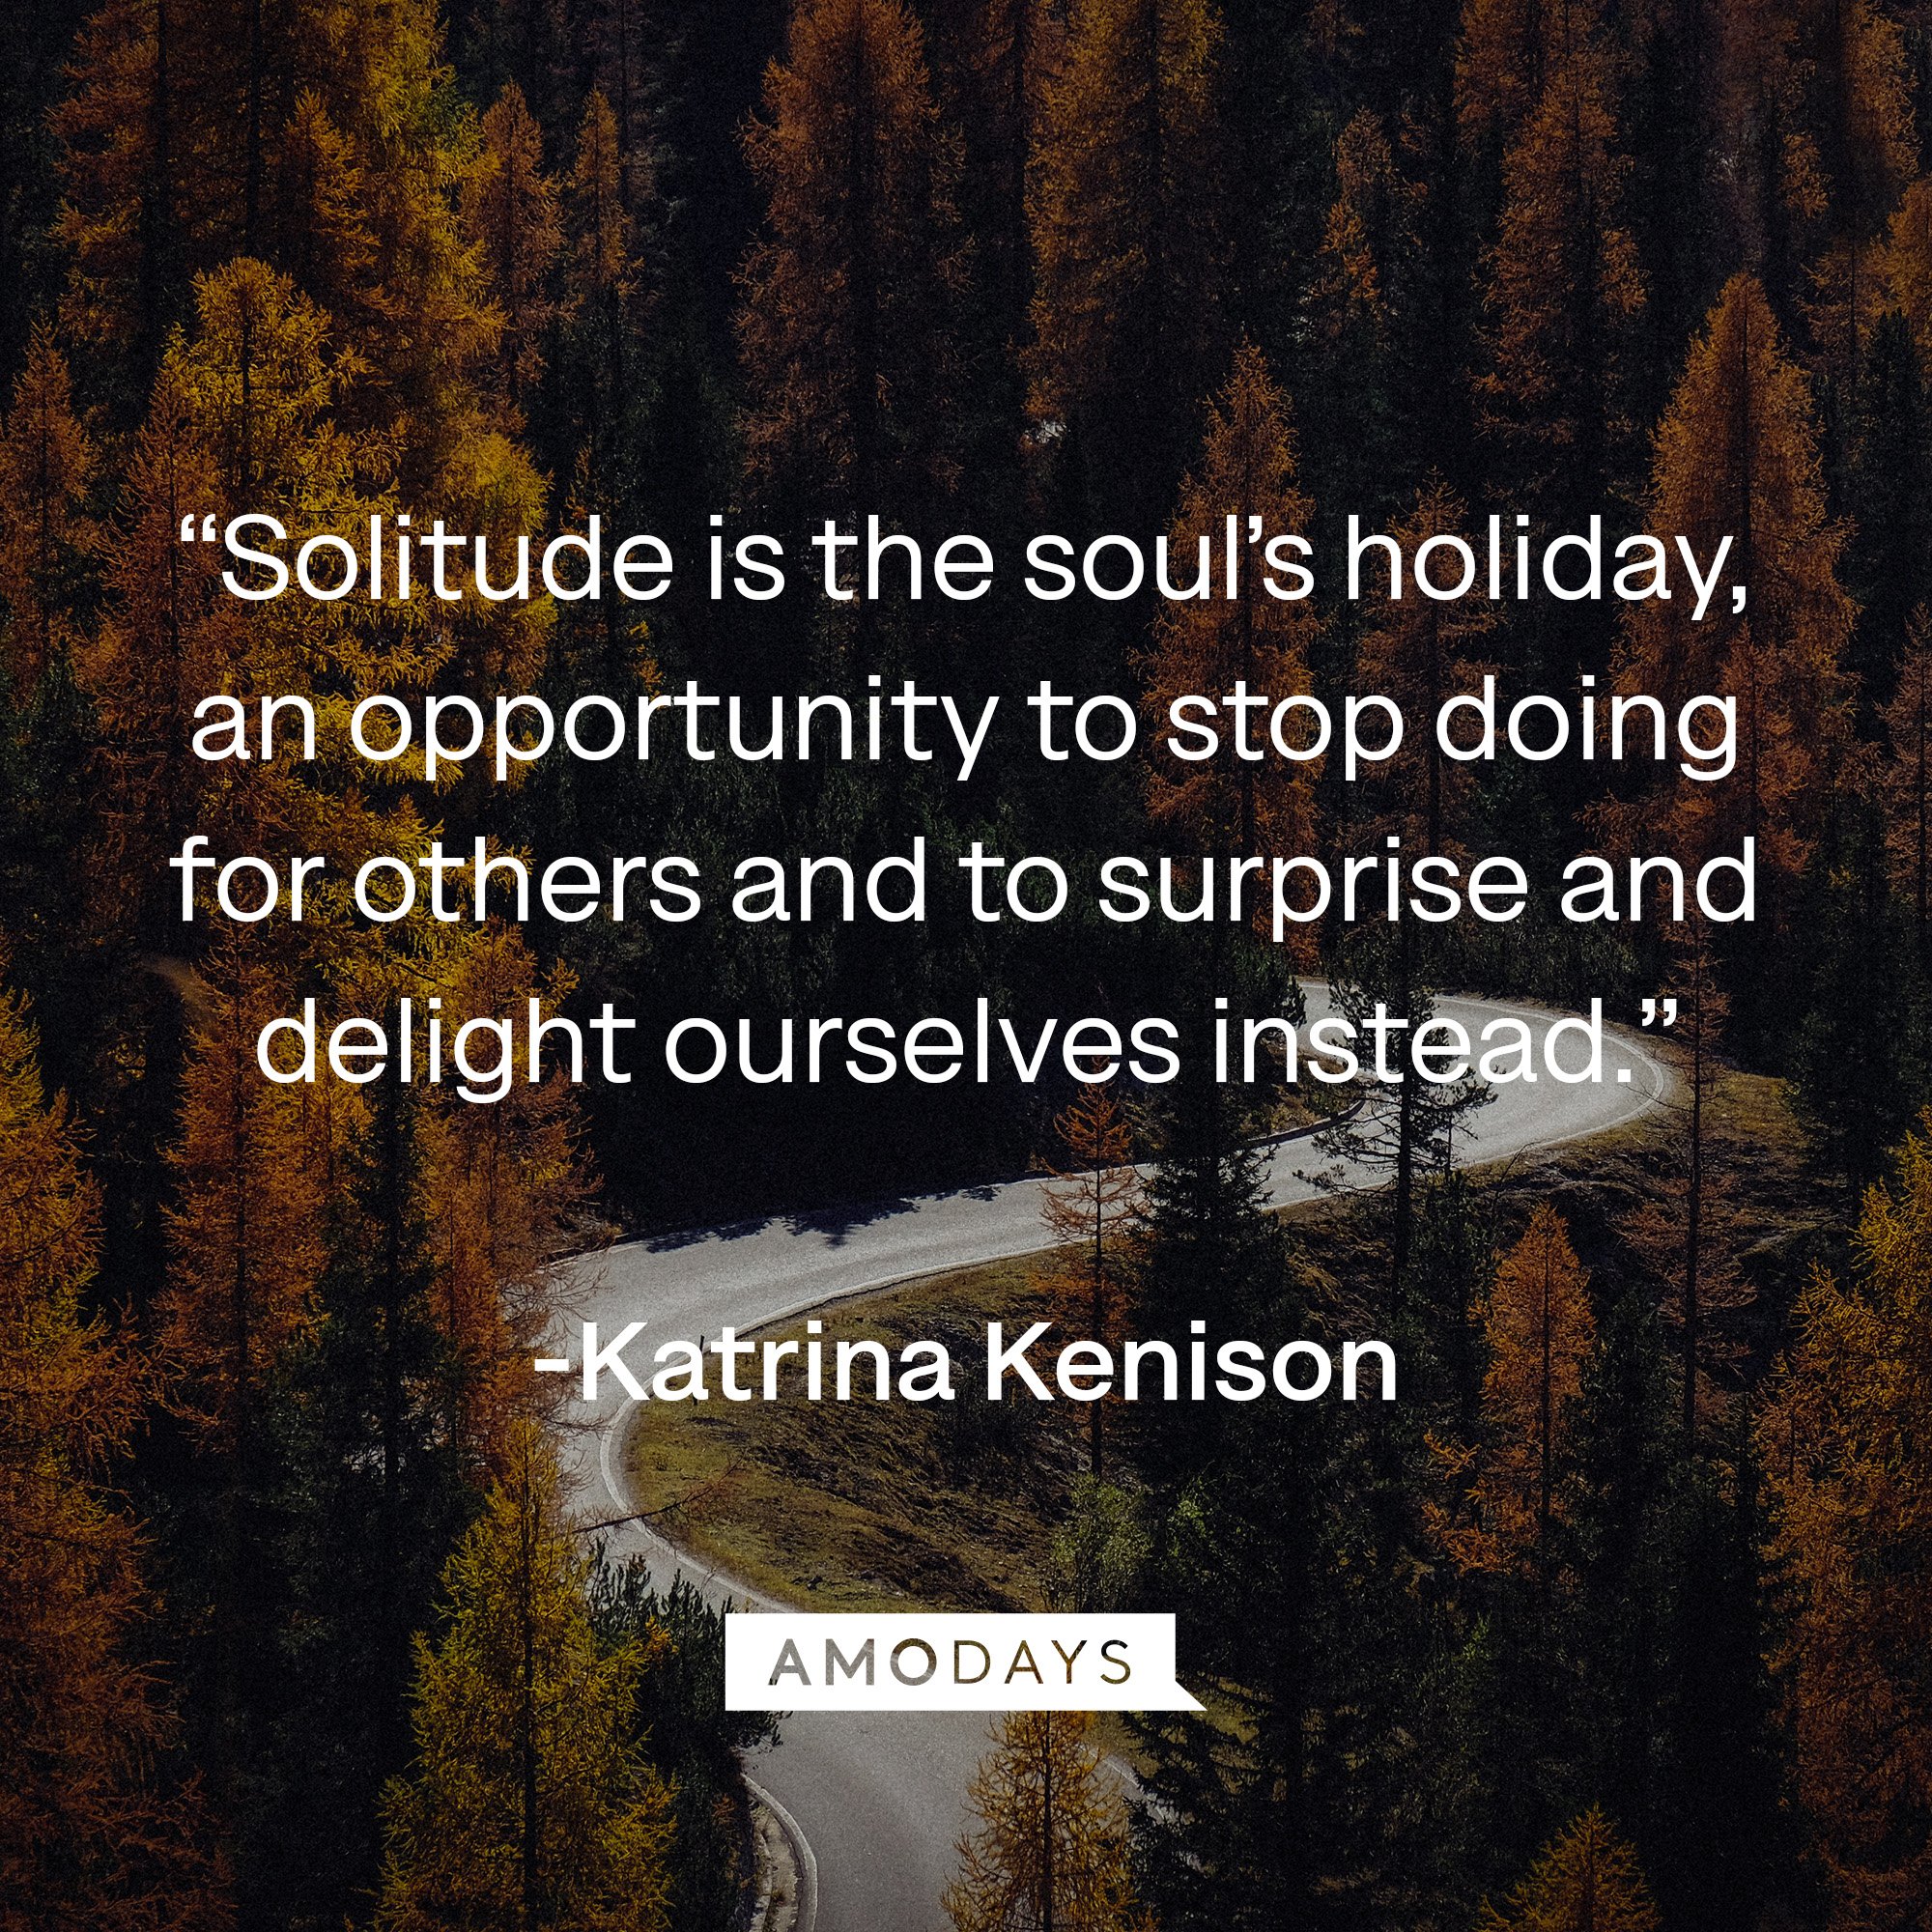 Katrina Kenison’s quote: “Solitude is the soul’s holiday, an opportunity to stop doing for others and to surprise and delight ourselves instead.” | Image: Amodays